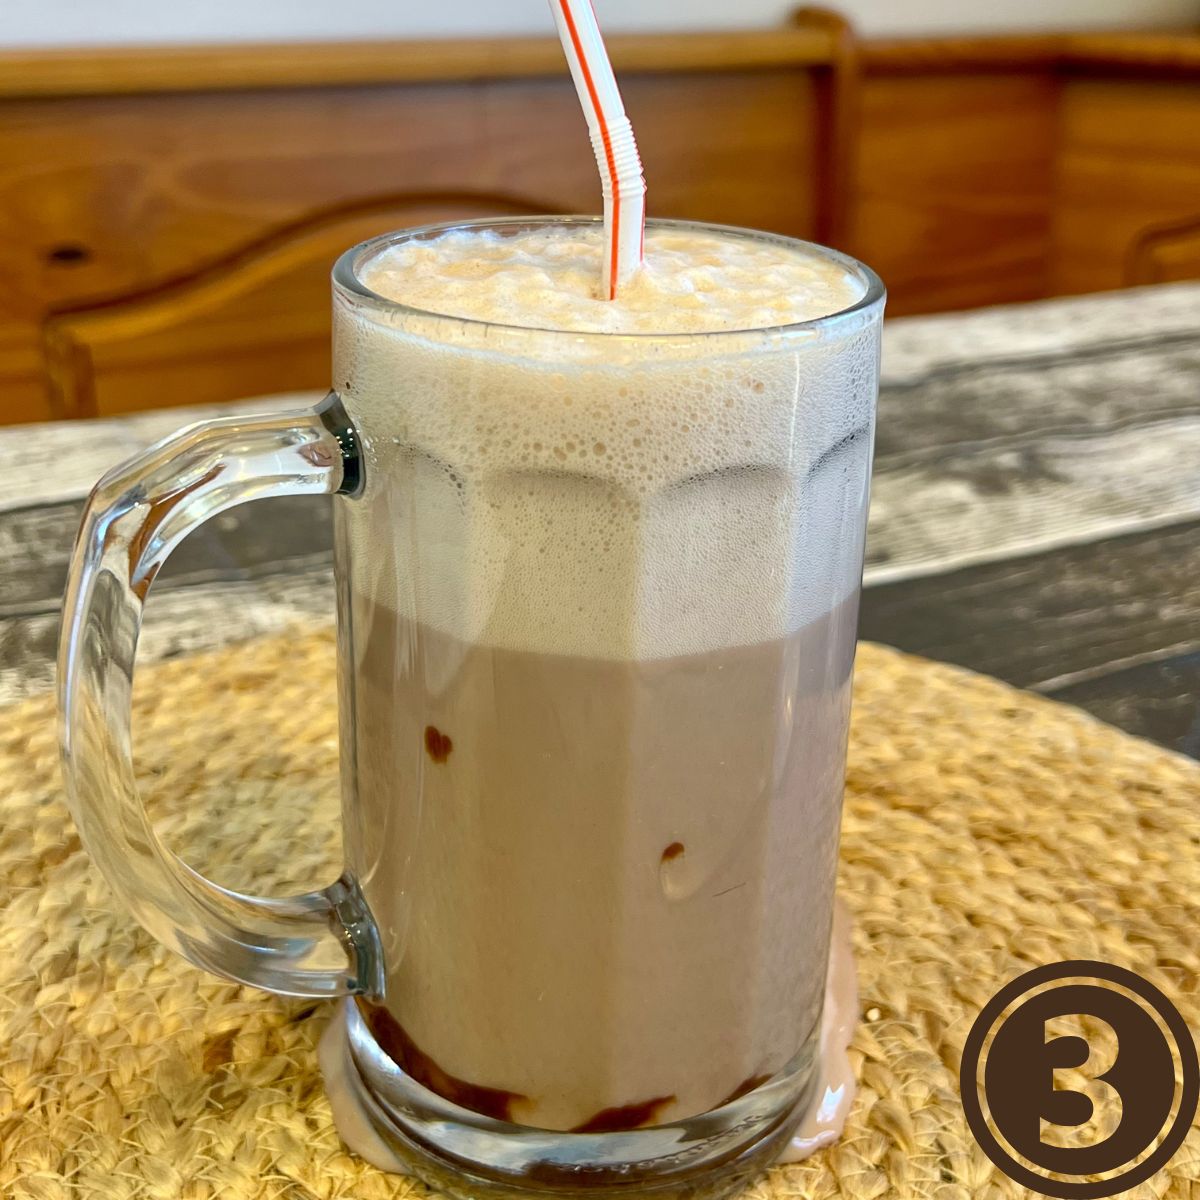 Foamy WW Chocolate Egg Cream in a glass with a straw on a table